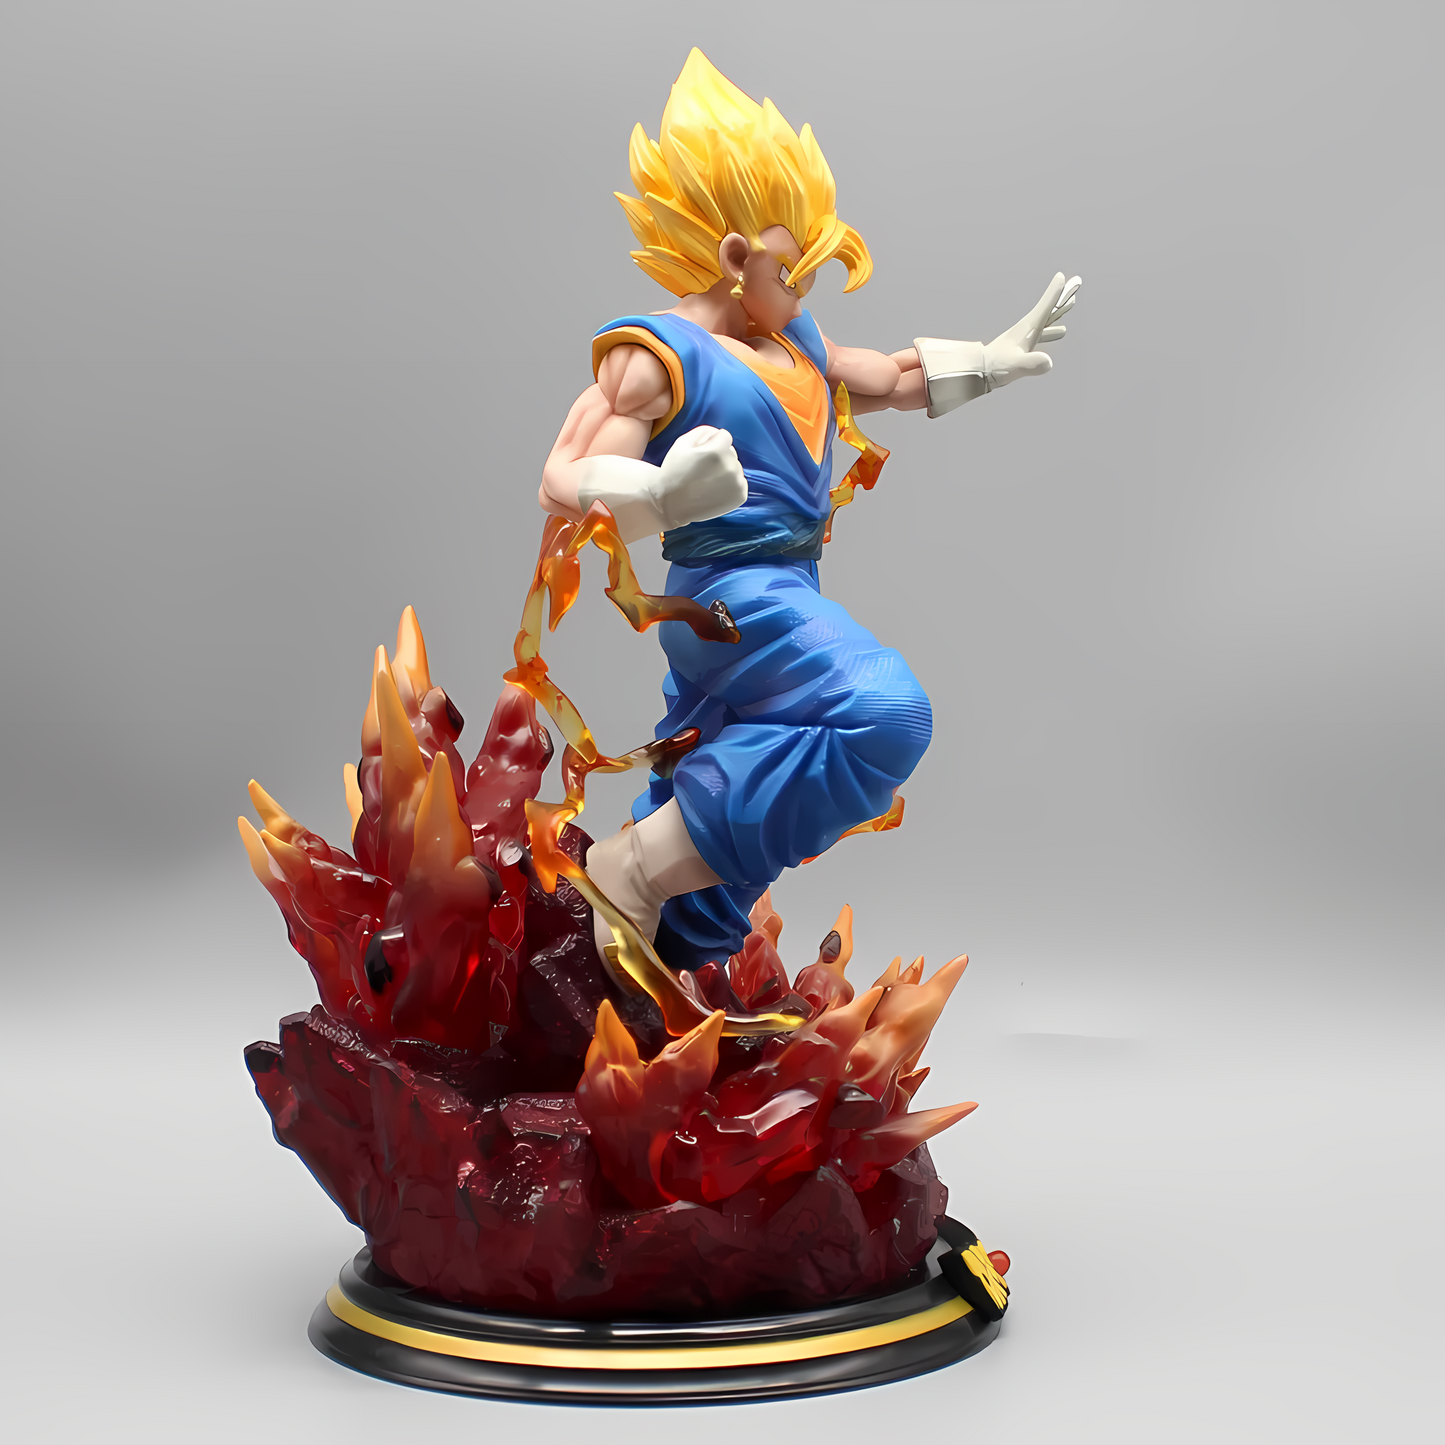 Side angle of the Dragon Ball Vegetto statue, his blonde hair spiked upwards, illustrating his power as he stands on a base that appears to erupt with lava-like flames.